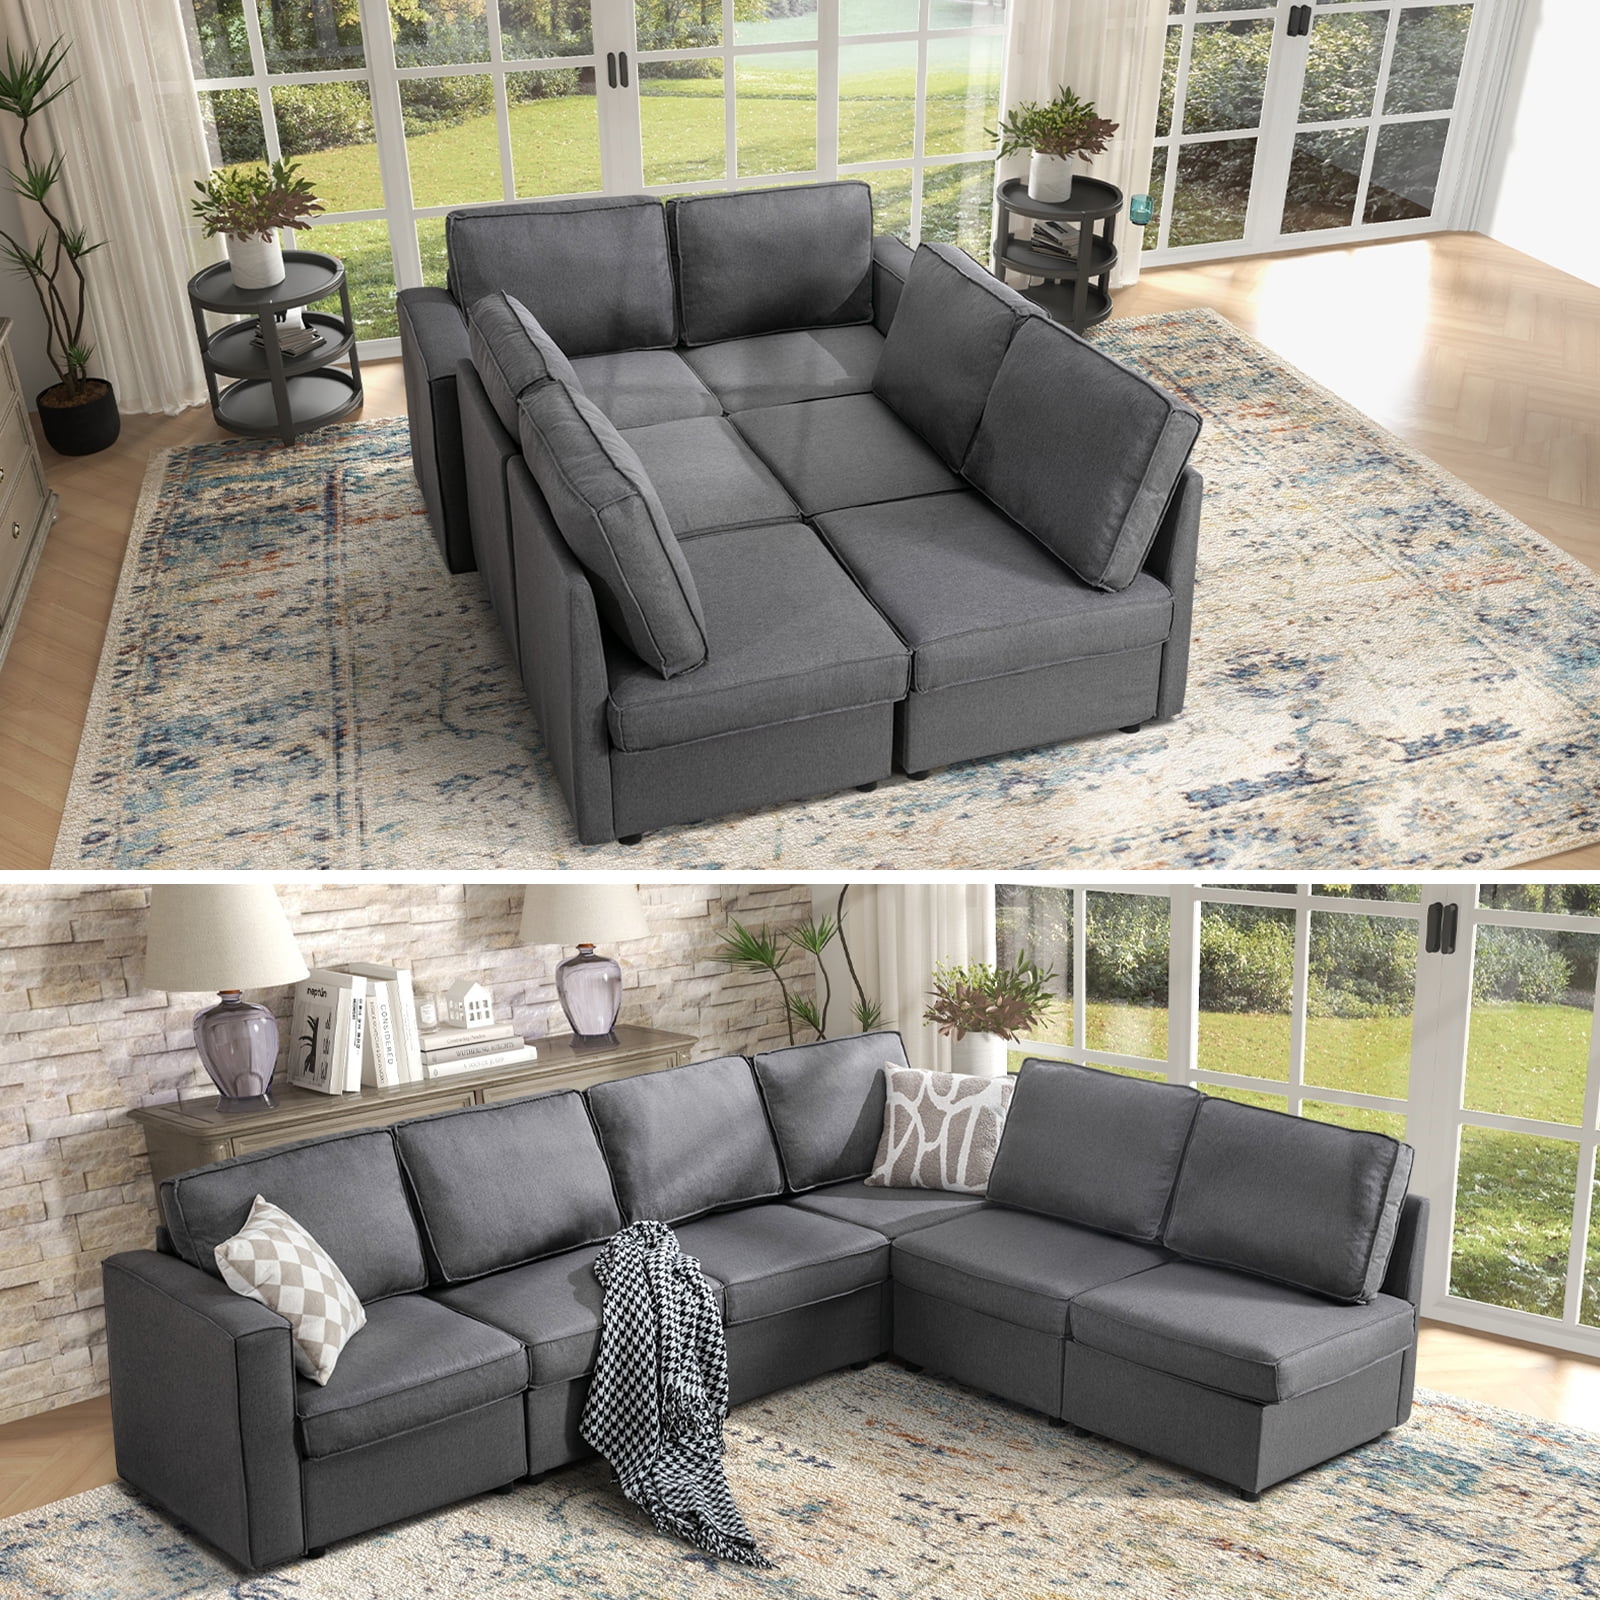 Kaden Gray Fabric Sleeper Sectional Sofa Chaise with Storage and